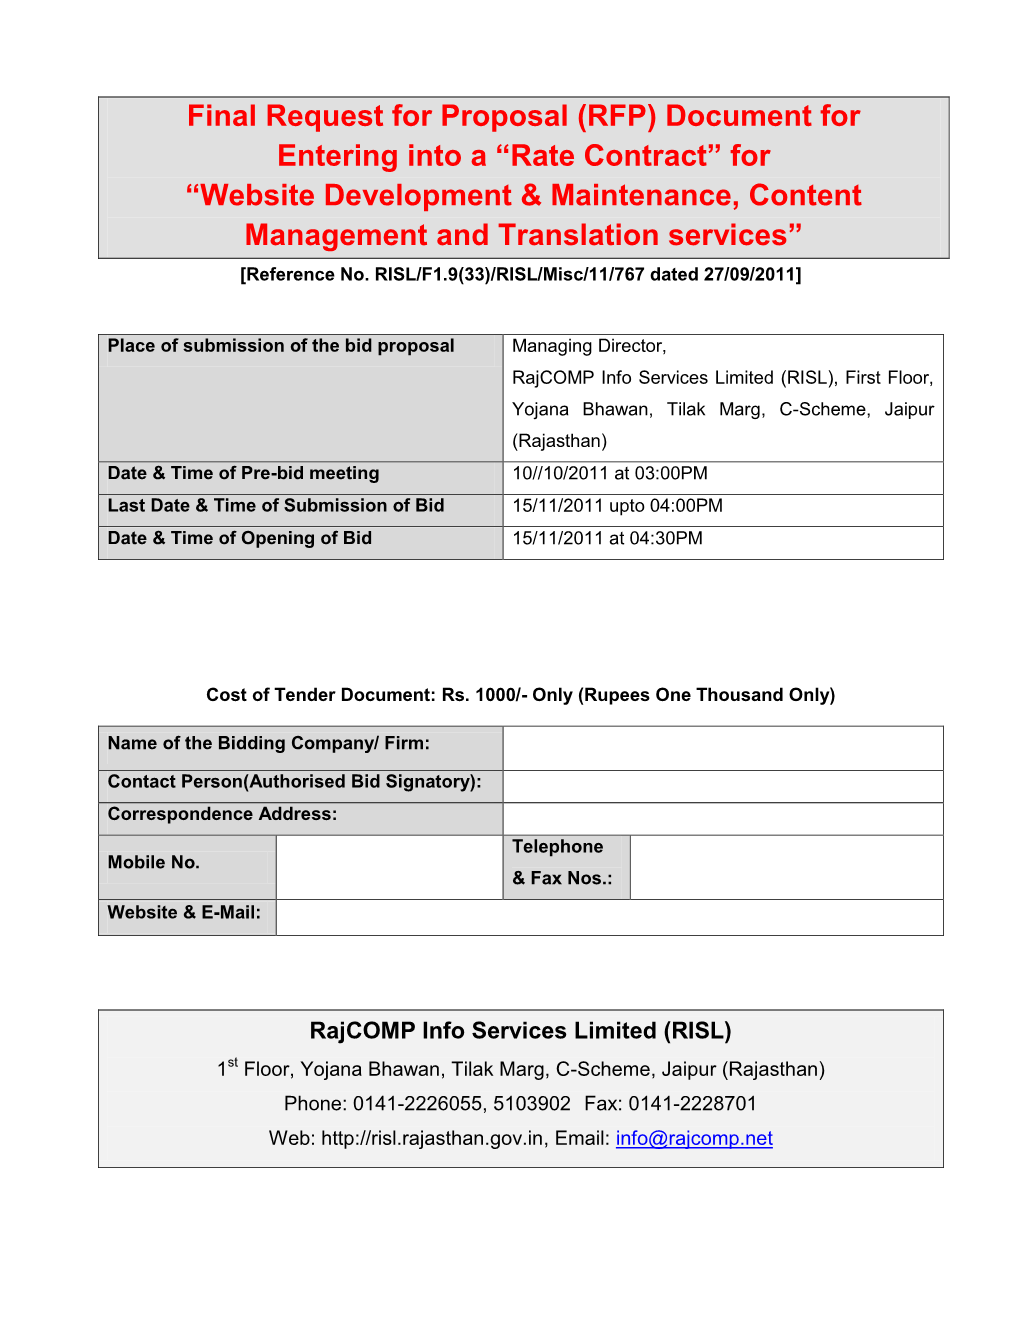 RFP) Document for Entering Into a “Rate Contract” for “Website Development & Maintenance, Content Management and Translation Services” [Reference No